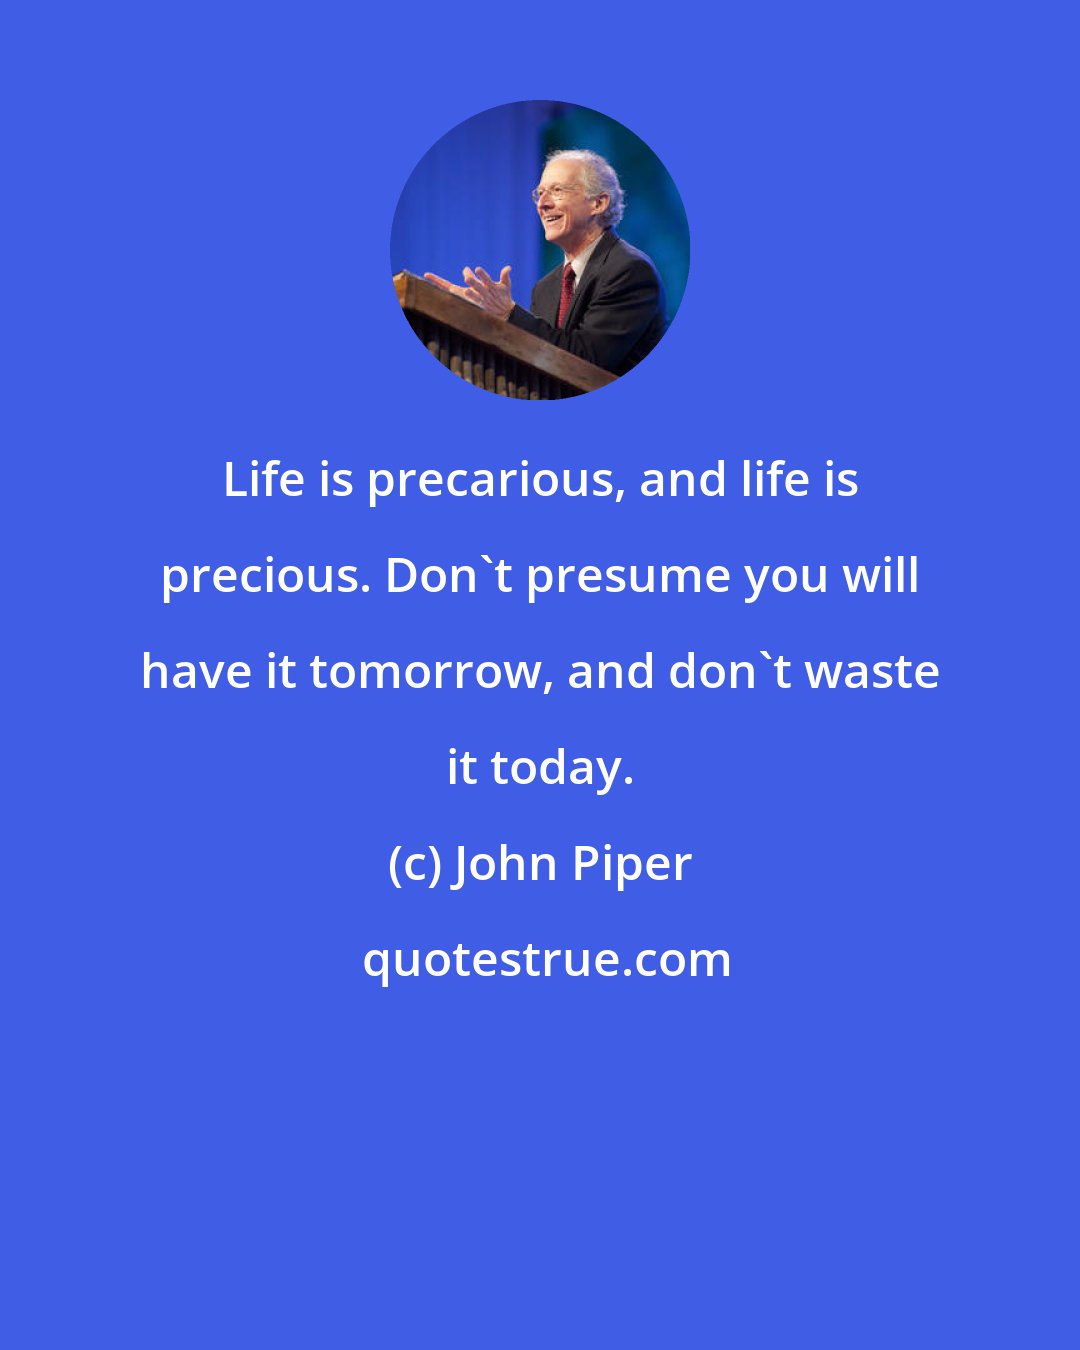 John Piper: Life is precarious, and life is precious. Don't presume you will have it tomorrow, and don't waste it today.